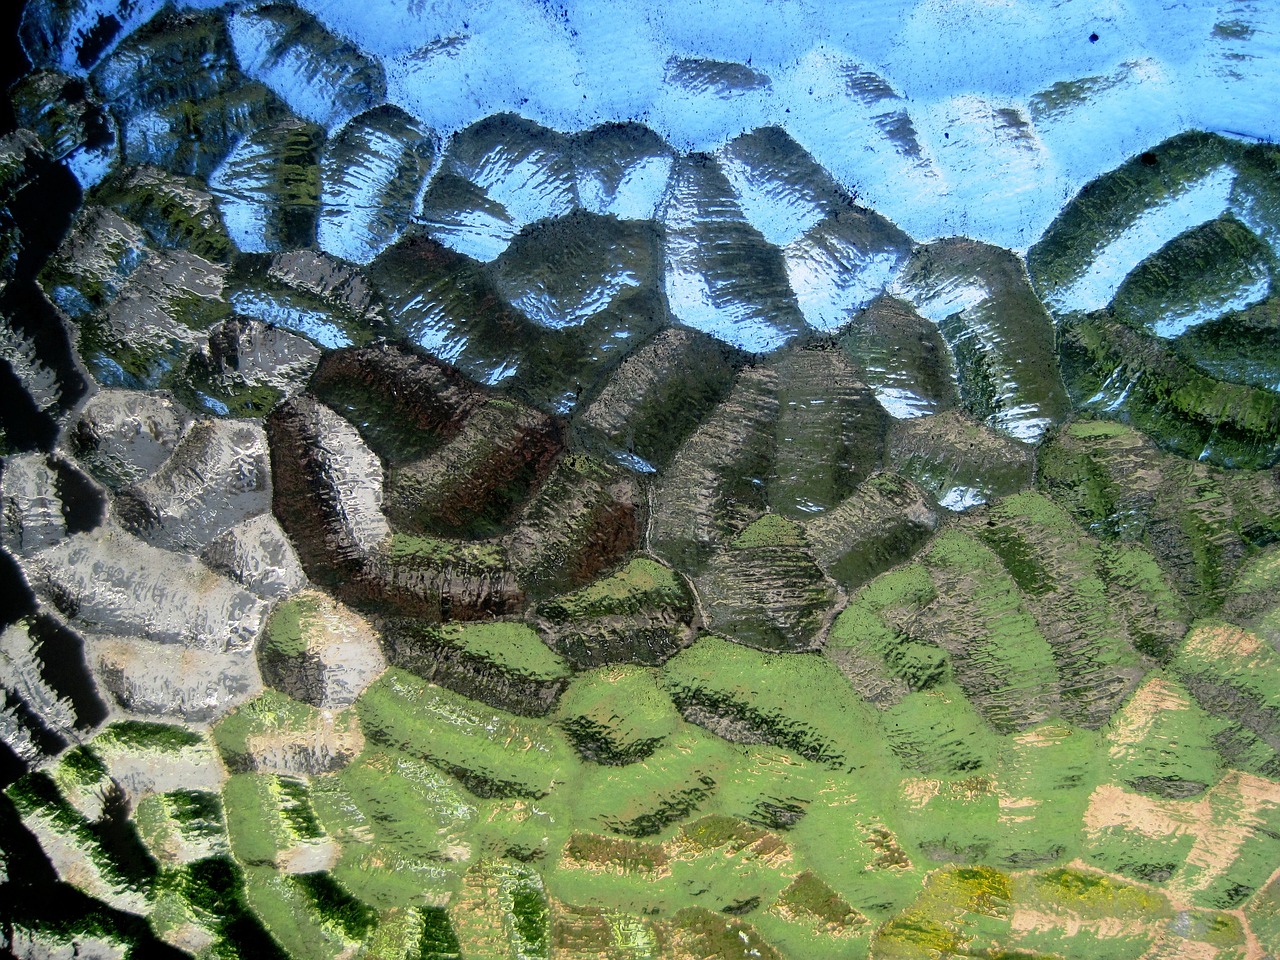 a close up of a painting of a mountain range, a macro photograph, by Jan Rustem, flickr, panfuturism, green stained glass, shed iridescent snakeskin, transparent corrugated glass, dappled afternoon sunlight